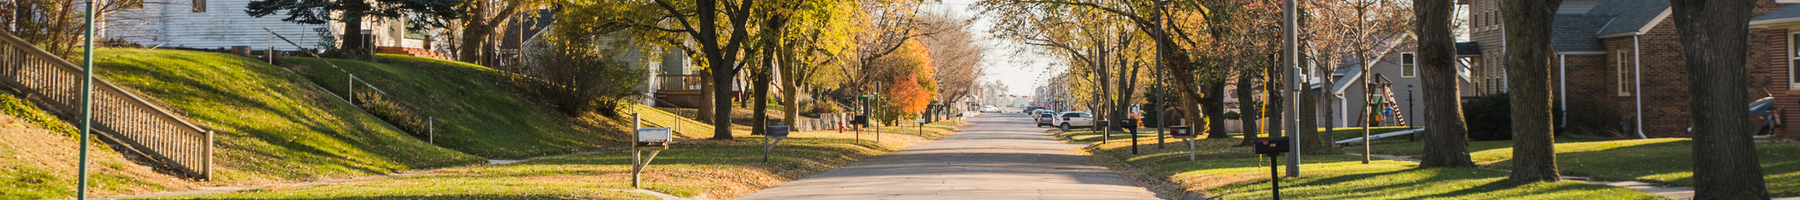 Looking down a residential street in a small town during the fall